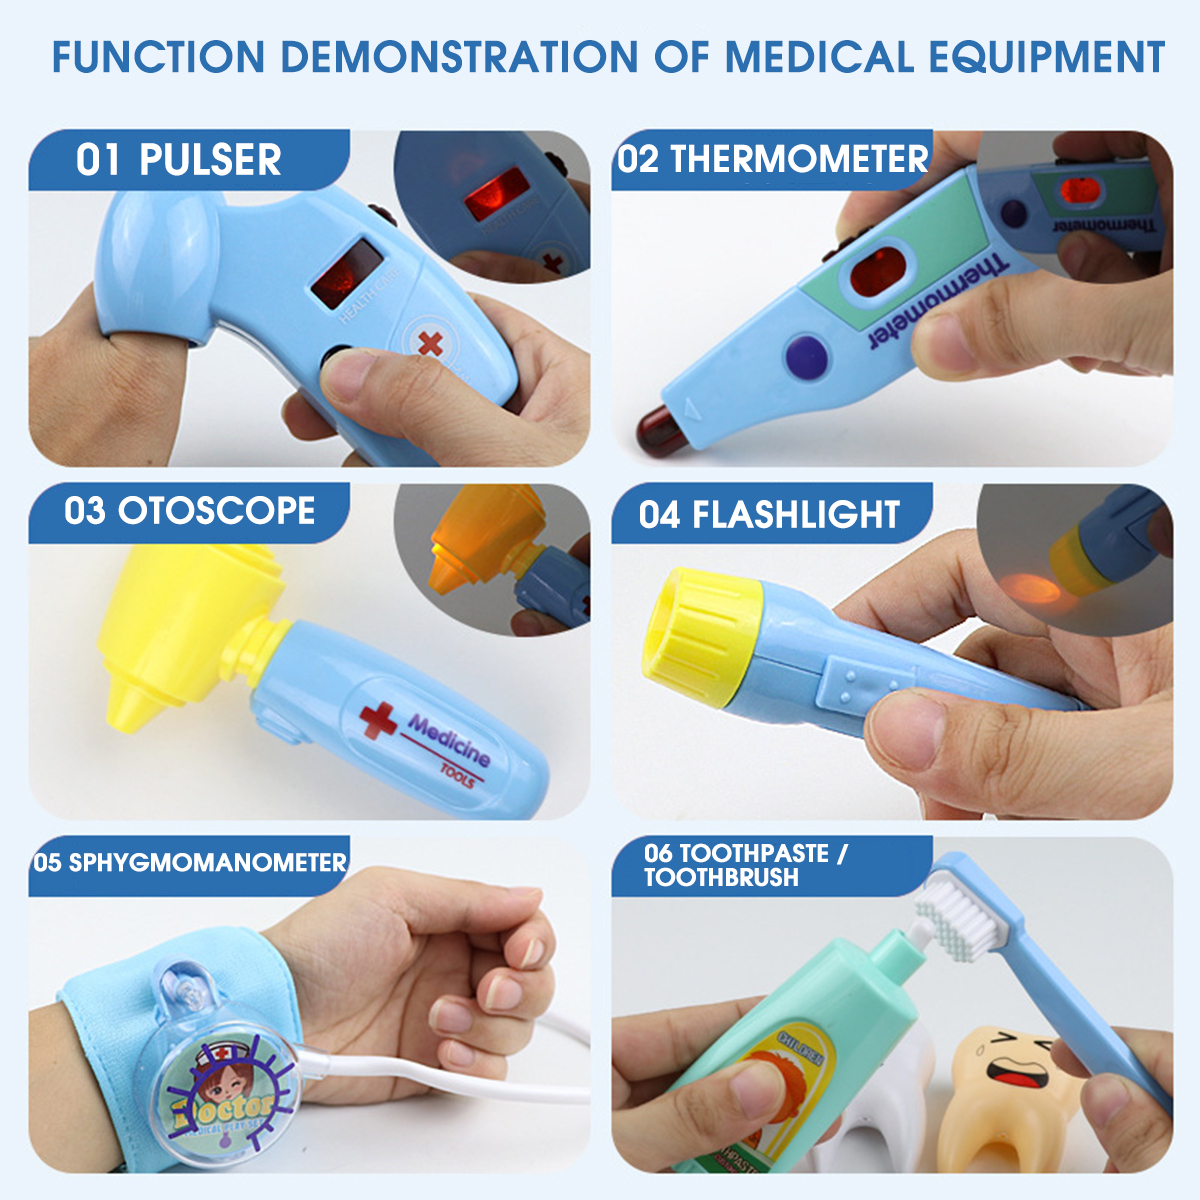 35-Pcs-Simulation-Medical-Role-Play-Pretend-Doctor-Game-Equipment-Set-Educational-Toy-with-Box-for-K-1730581-4